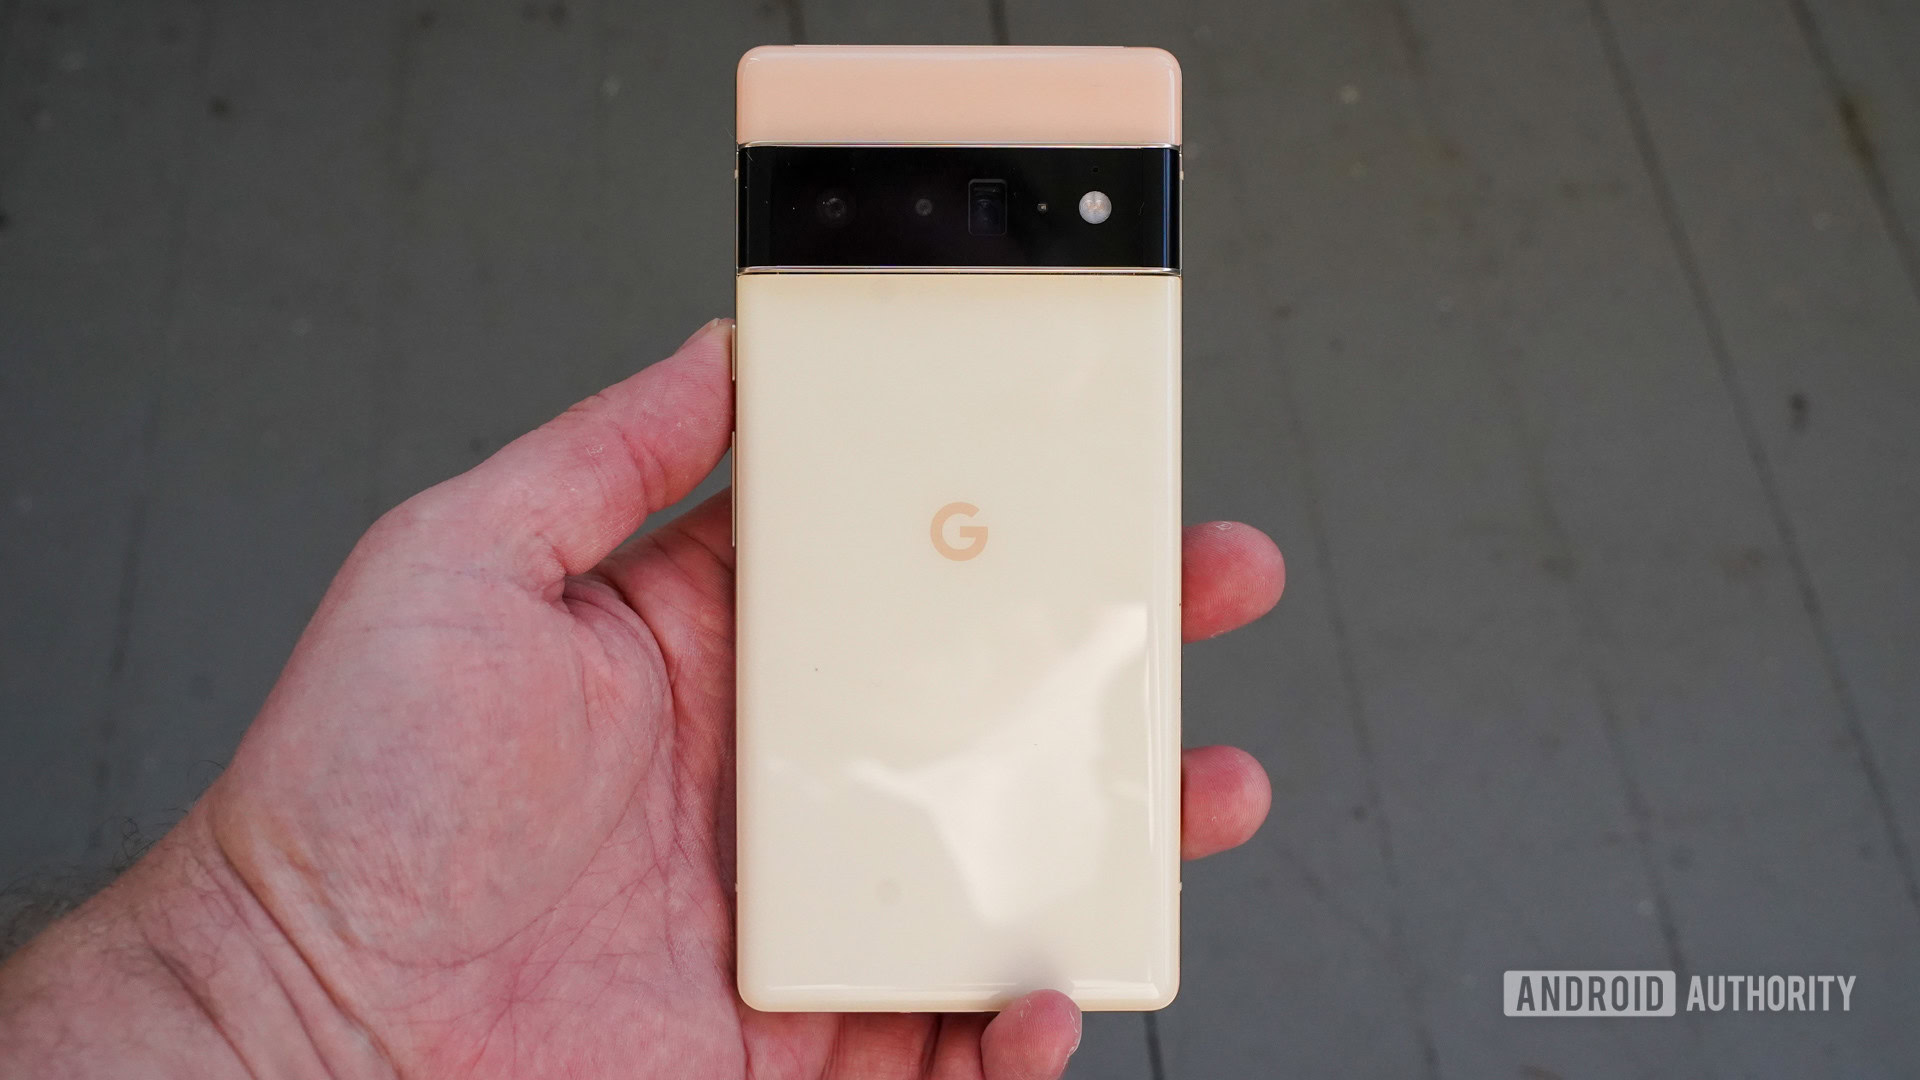 Google Pixel 6 Pro rear panel in the hand